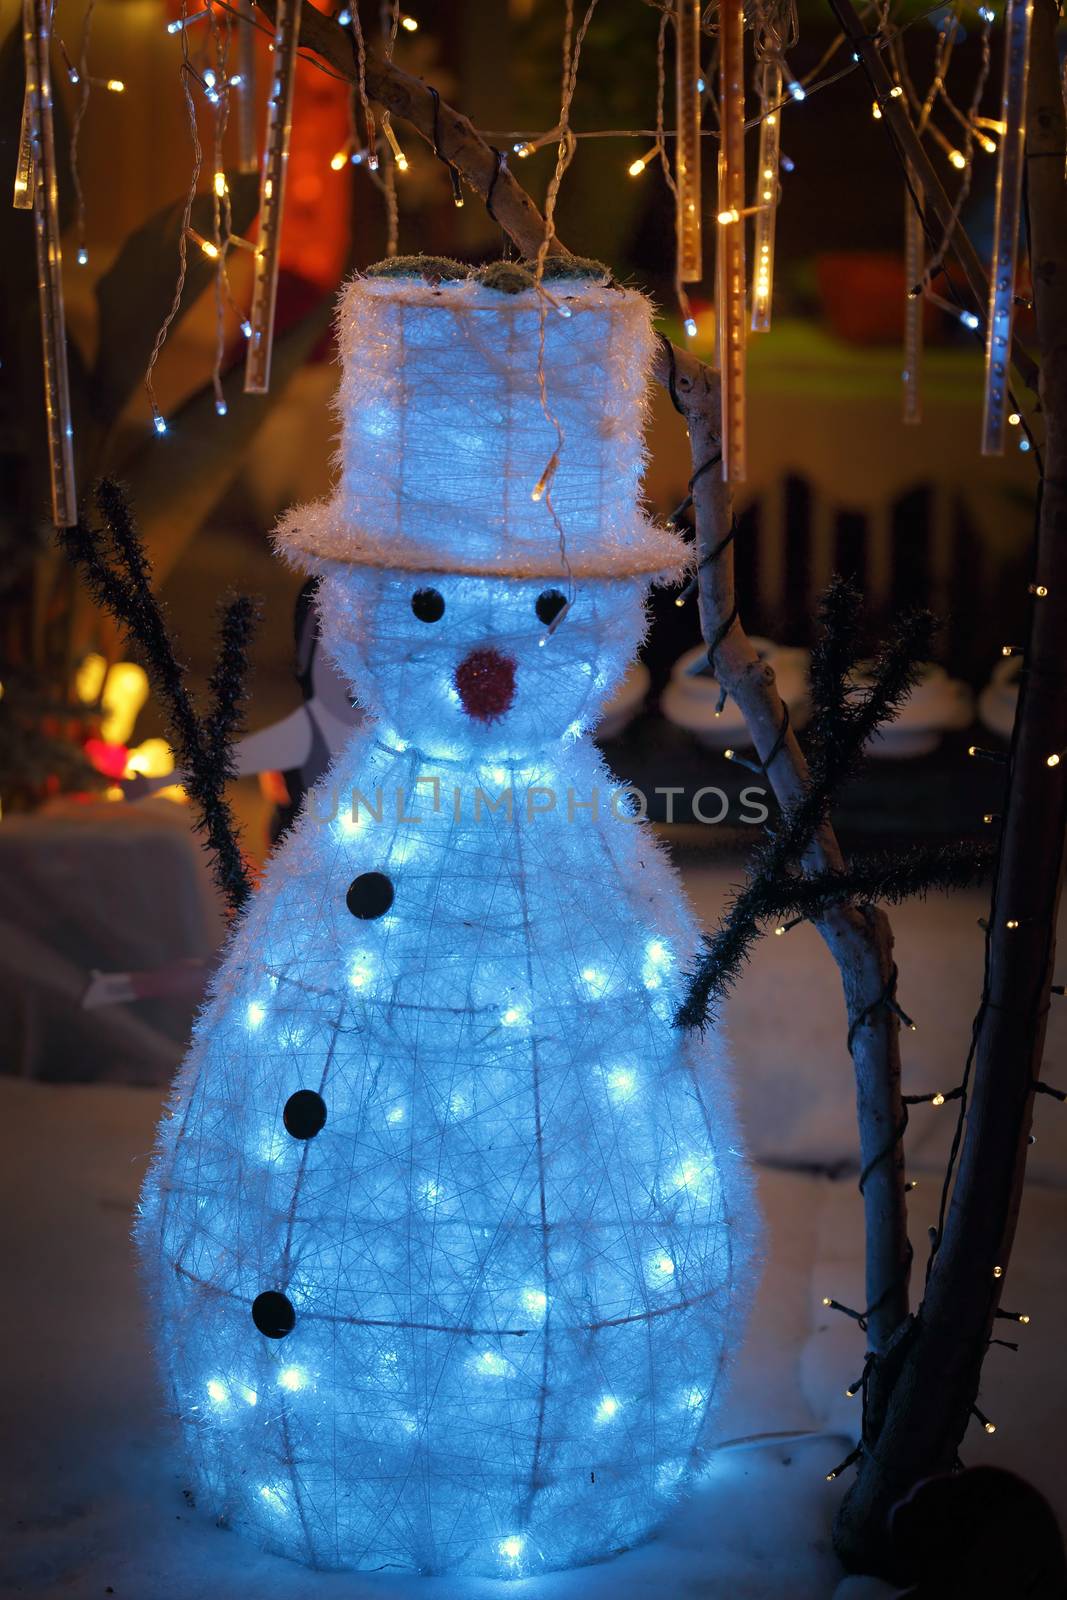 Snowman snow Christmas display with twinkling lights wonderland by lovleah